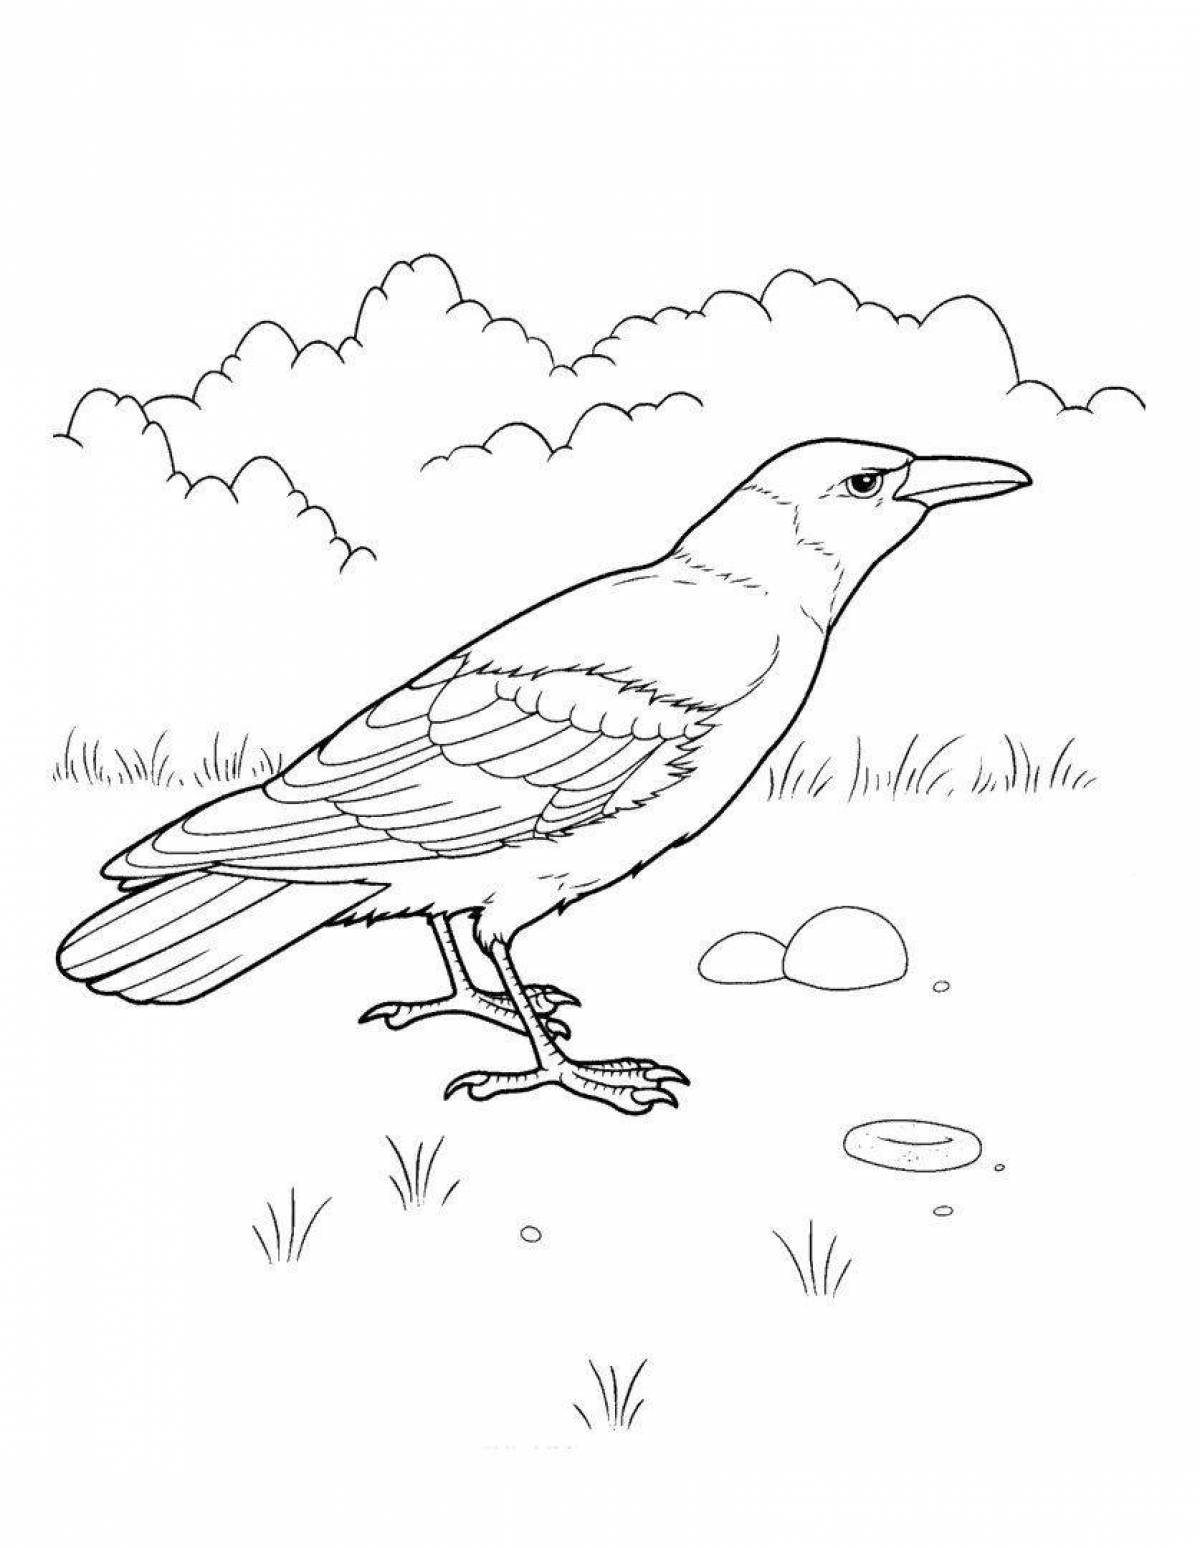 Coloring book funny crow for children 6-7 years old